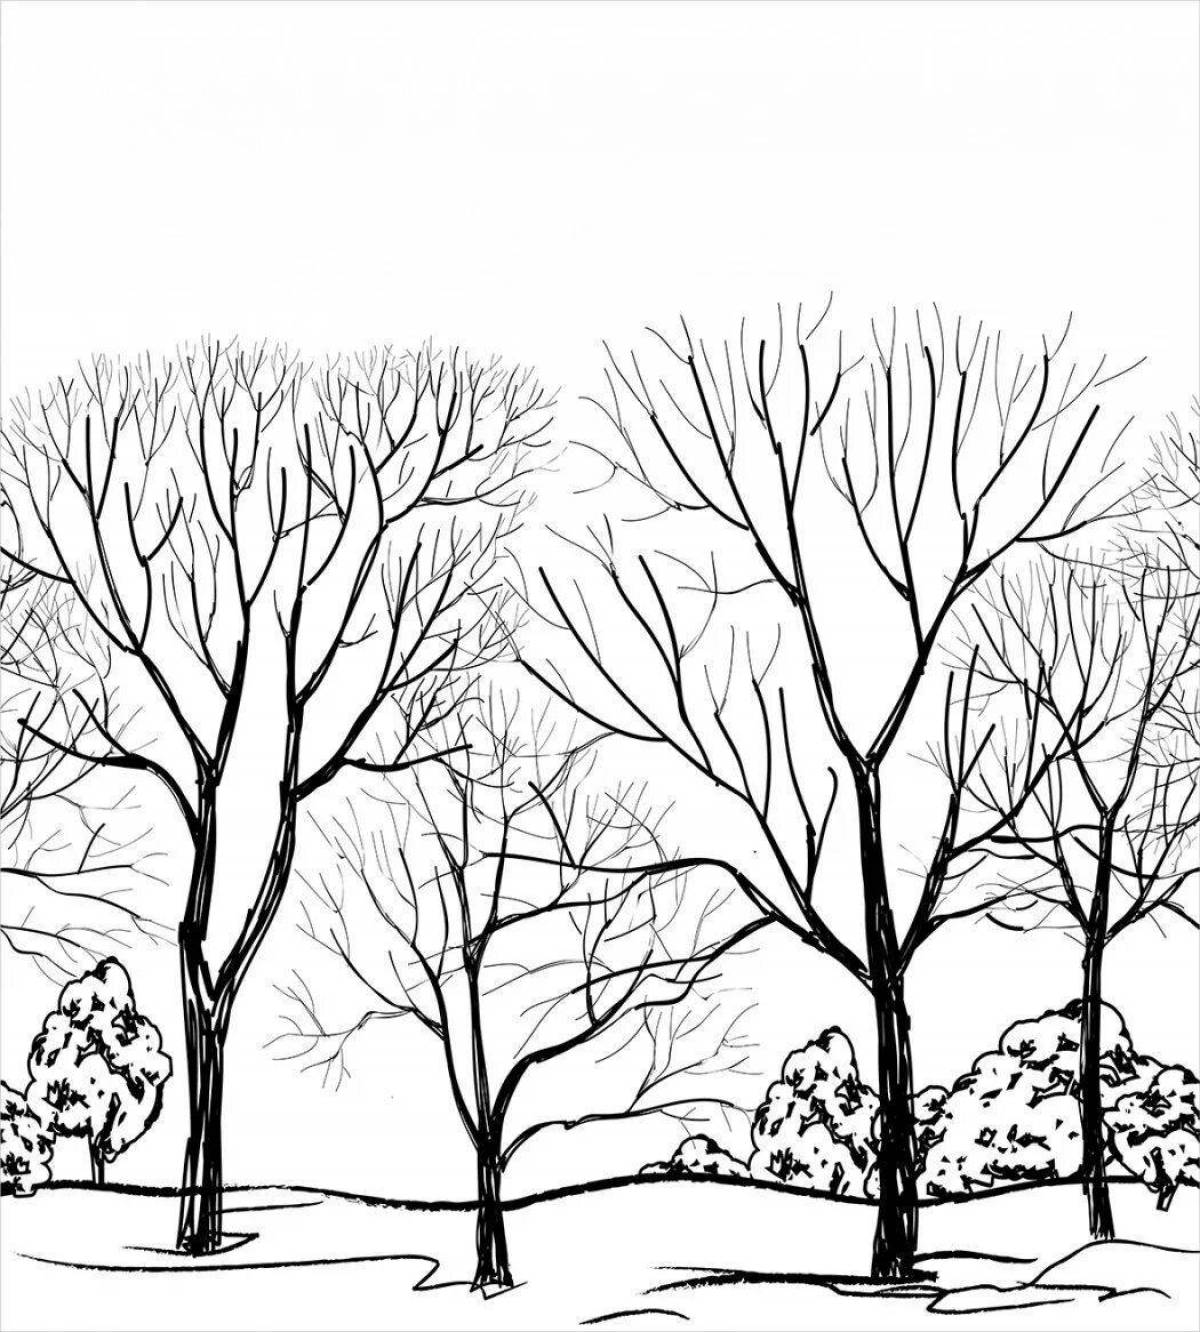 Trees in the snow #2